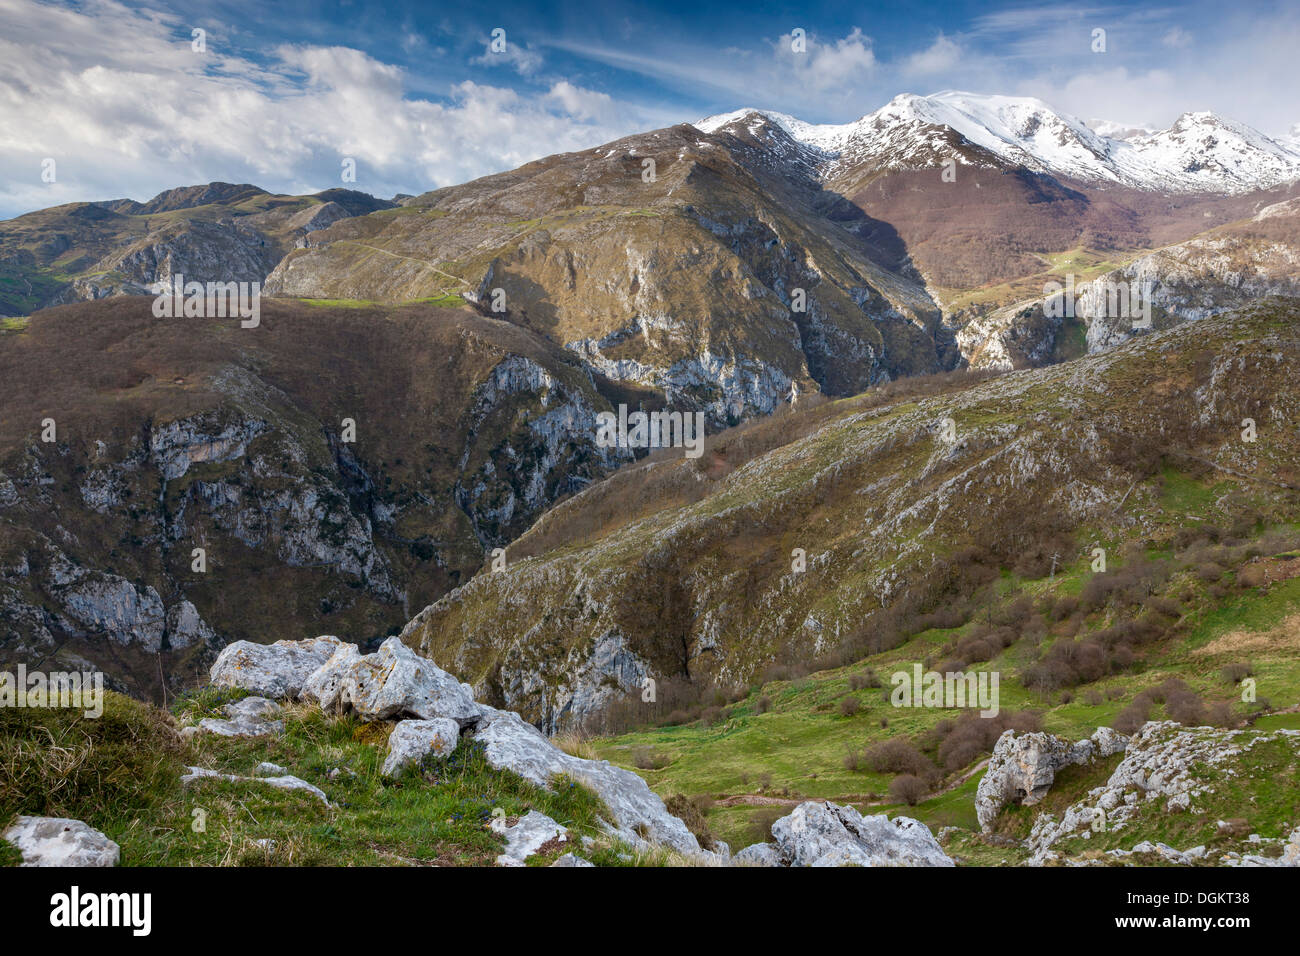 View from Sierra Cocon over Urdon valley in the Picos de Europa National Park. Stock Photo